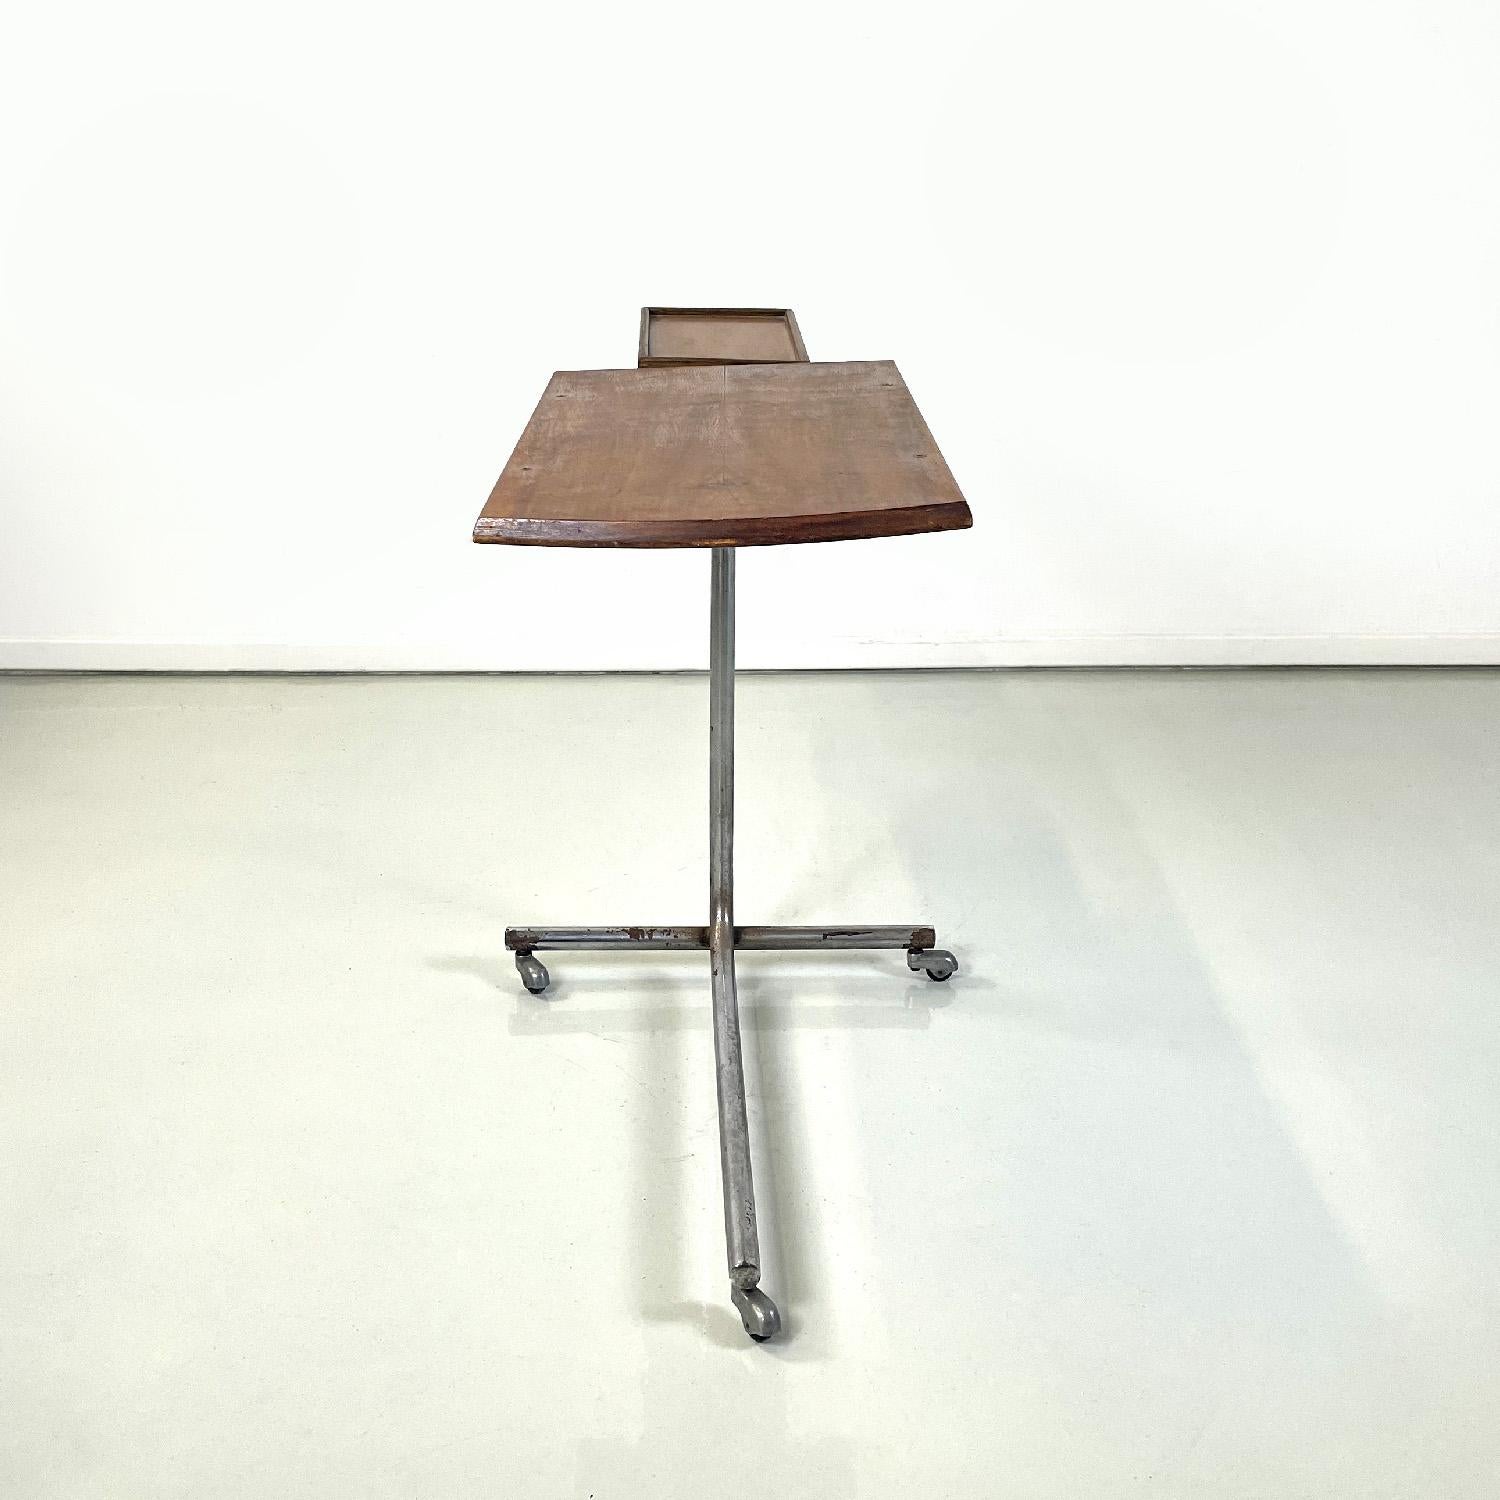 Italian mid-century modern wood and metal industrial work table, 1960s For Sale 1